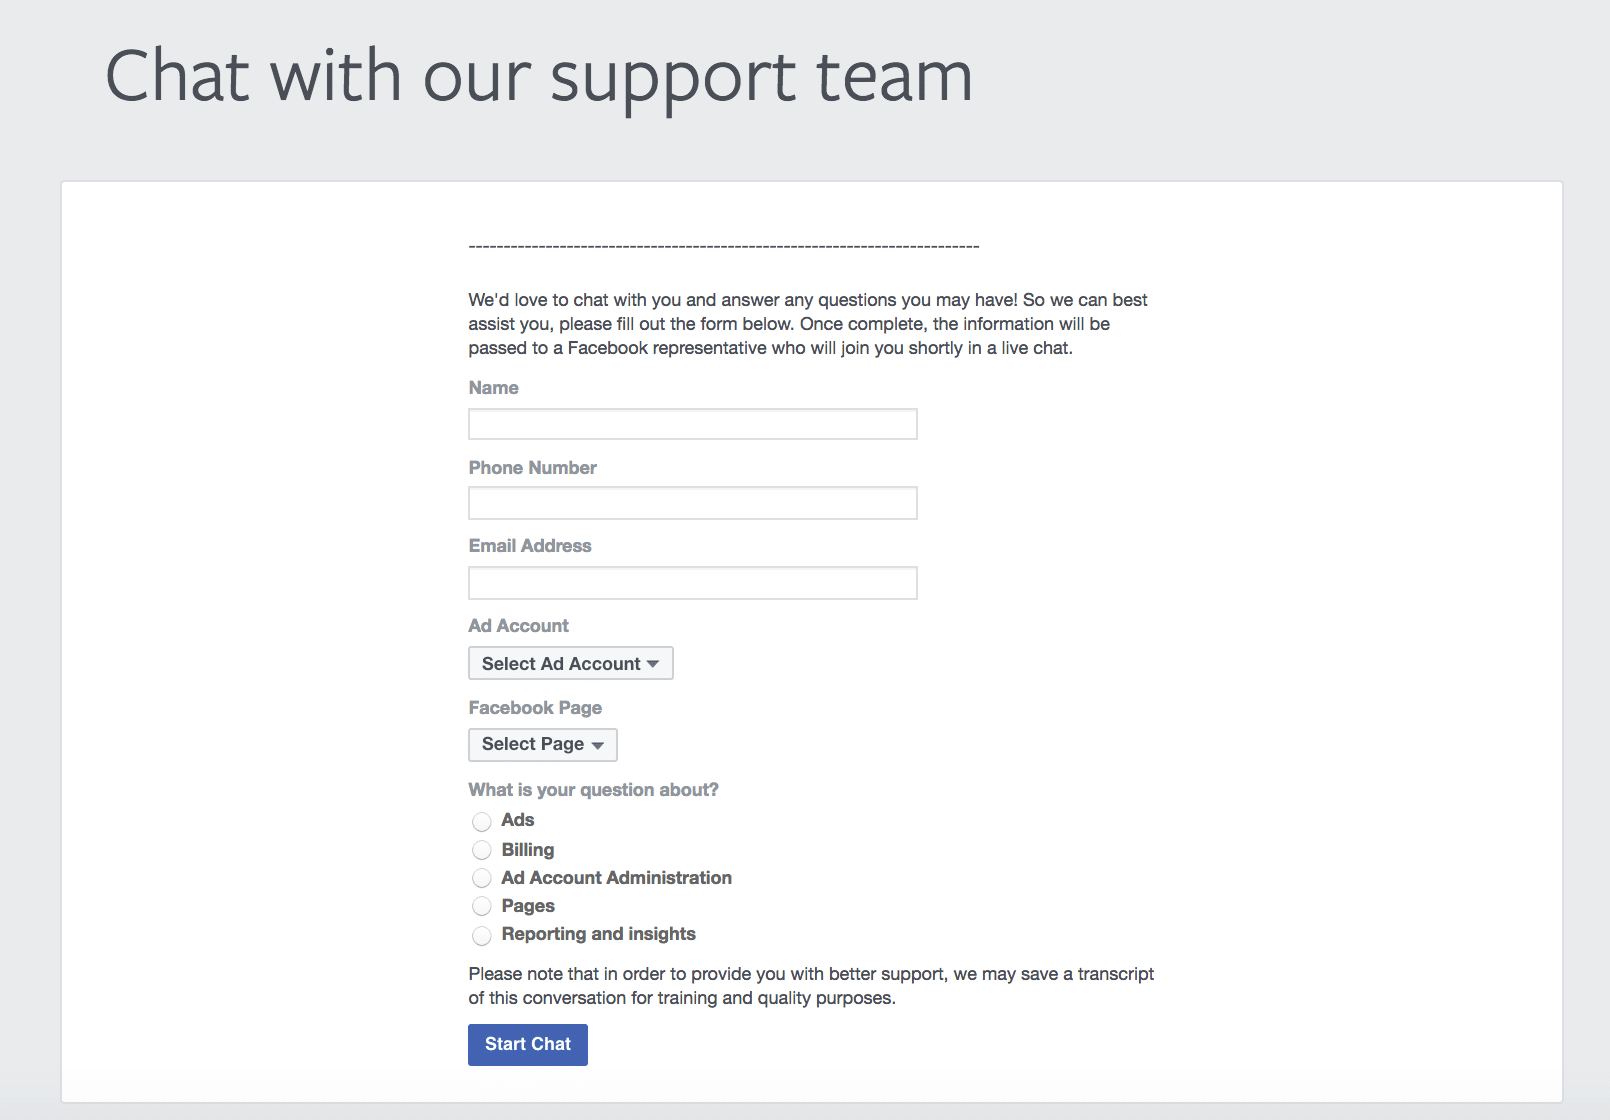 Facebook help chat form